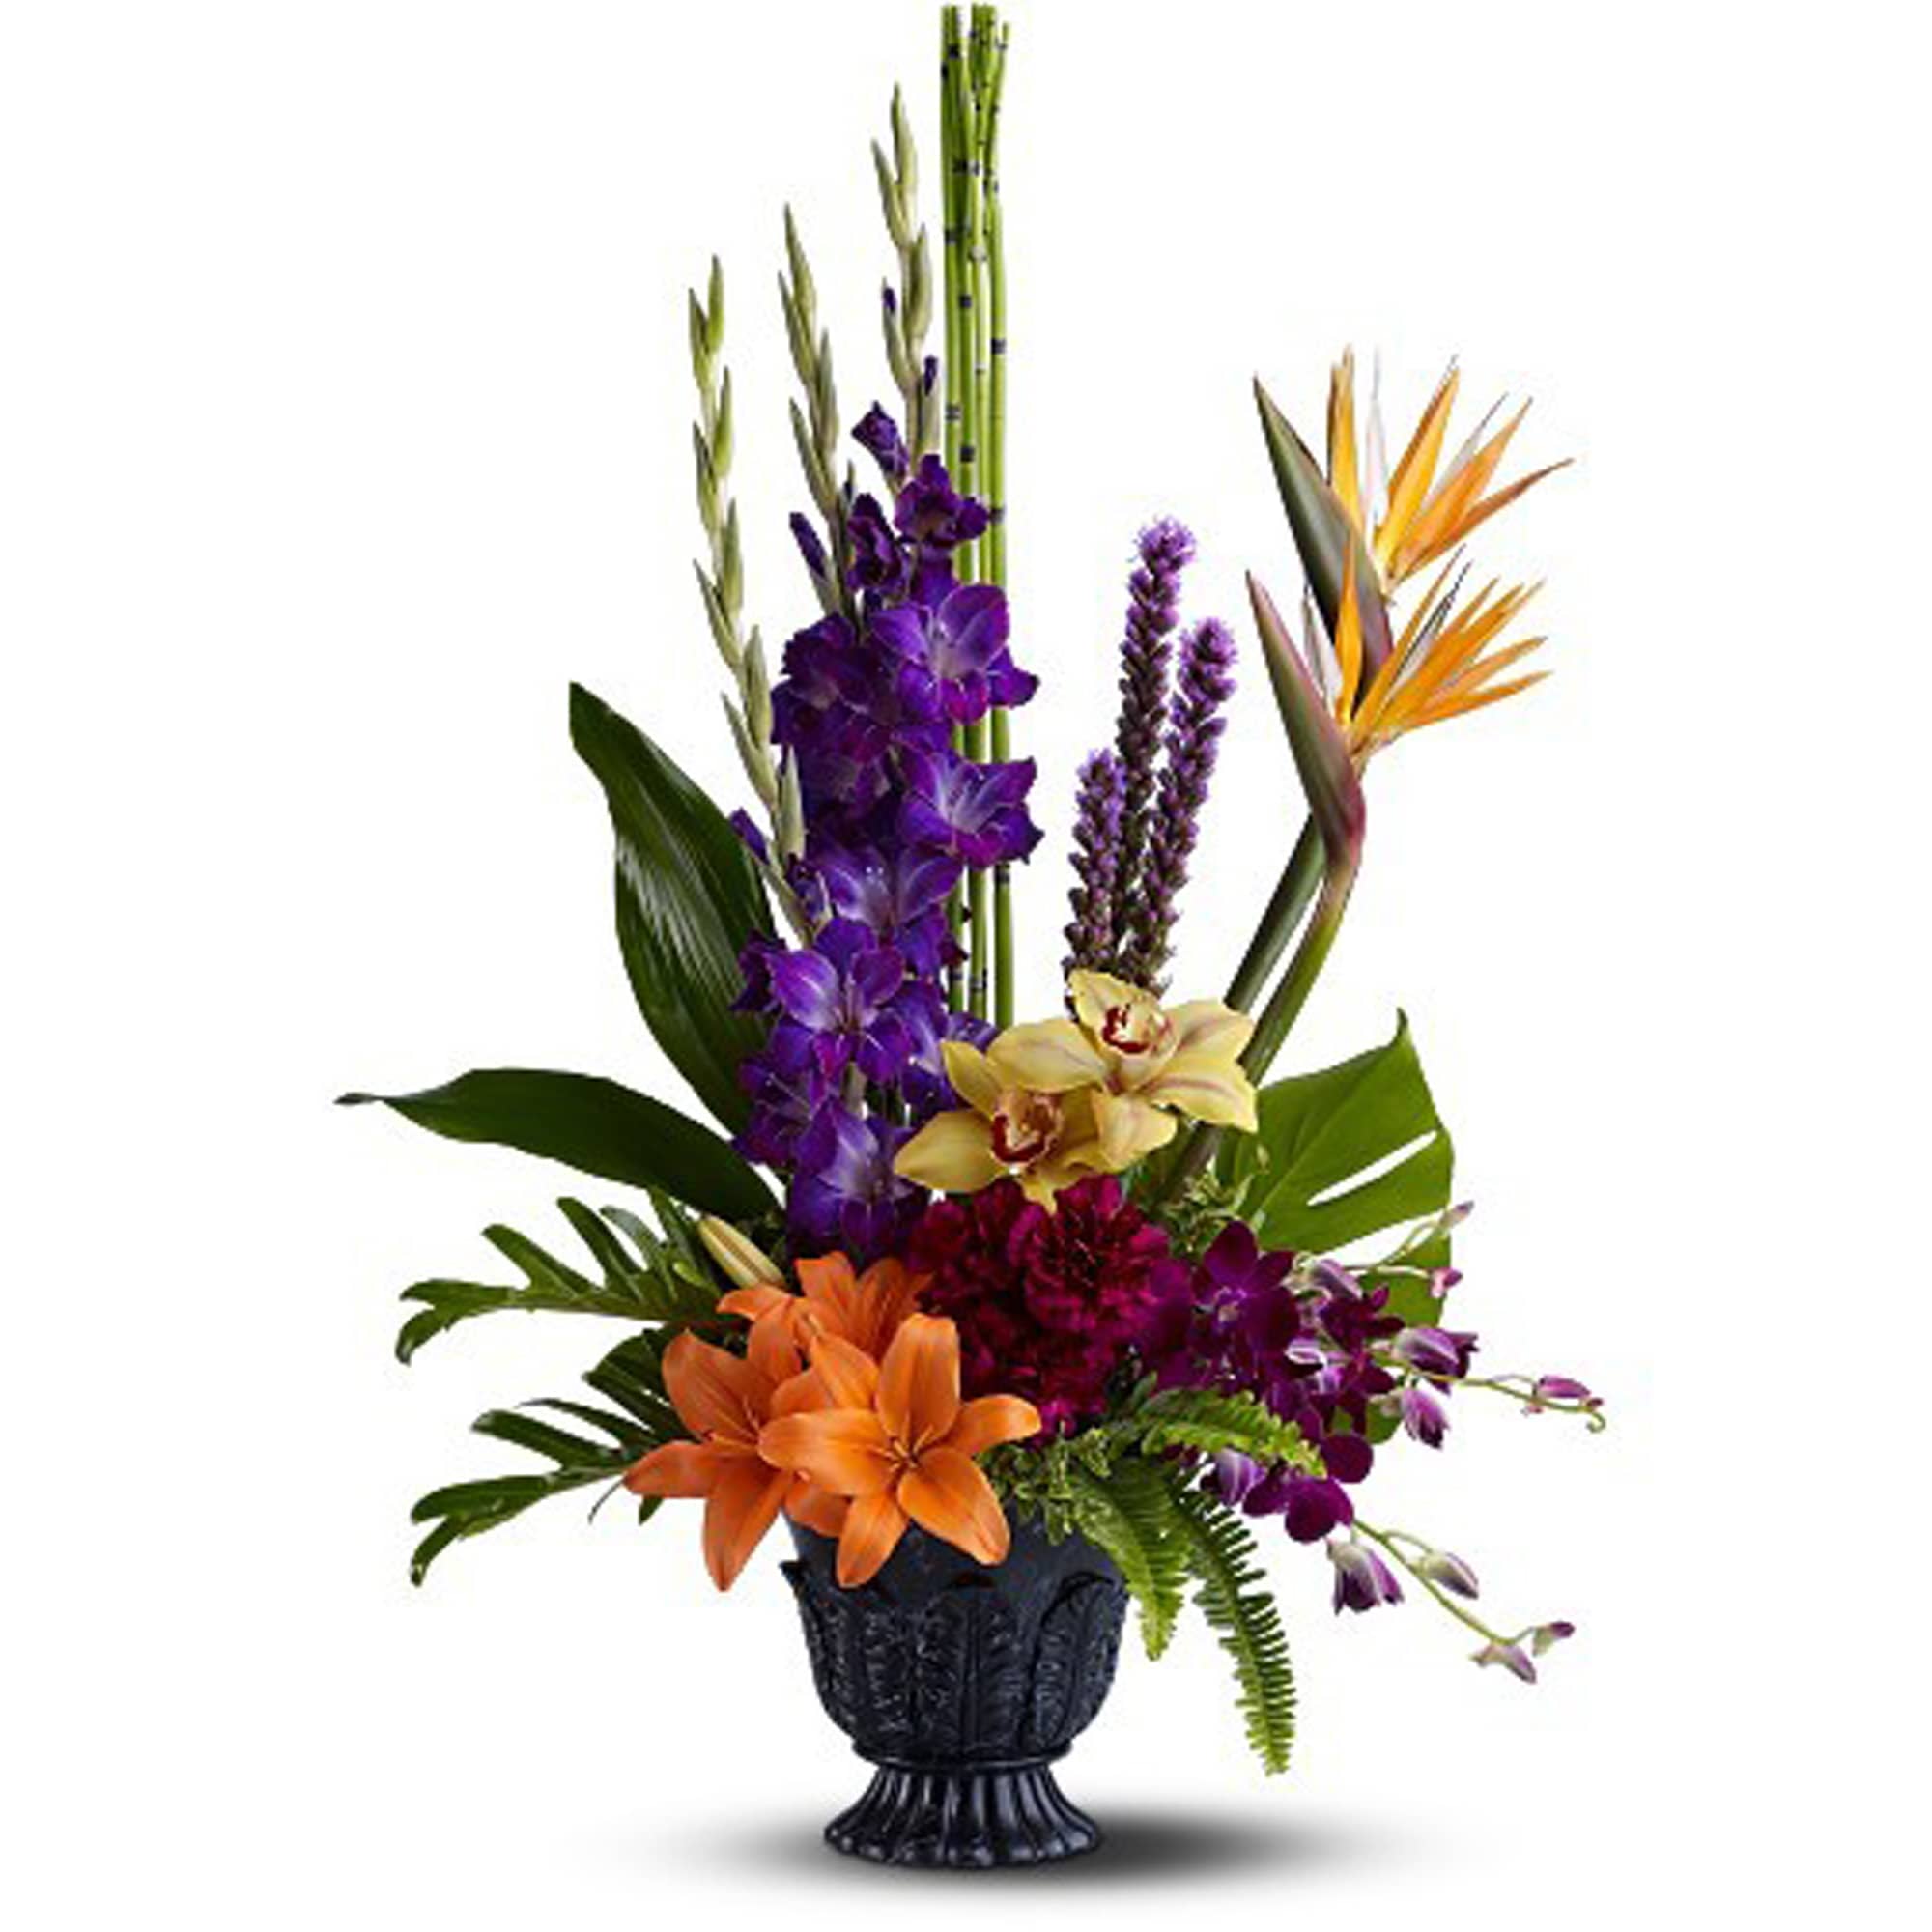 Asiatic lilies, orchids, gladioli, Birds of Paradise, Xanadu Philodendron and Aspidistra leaves